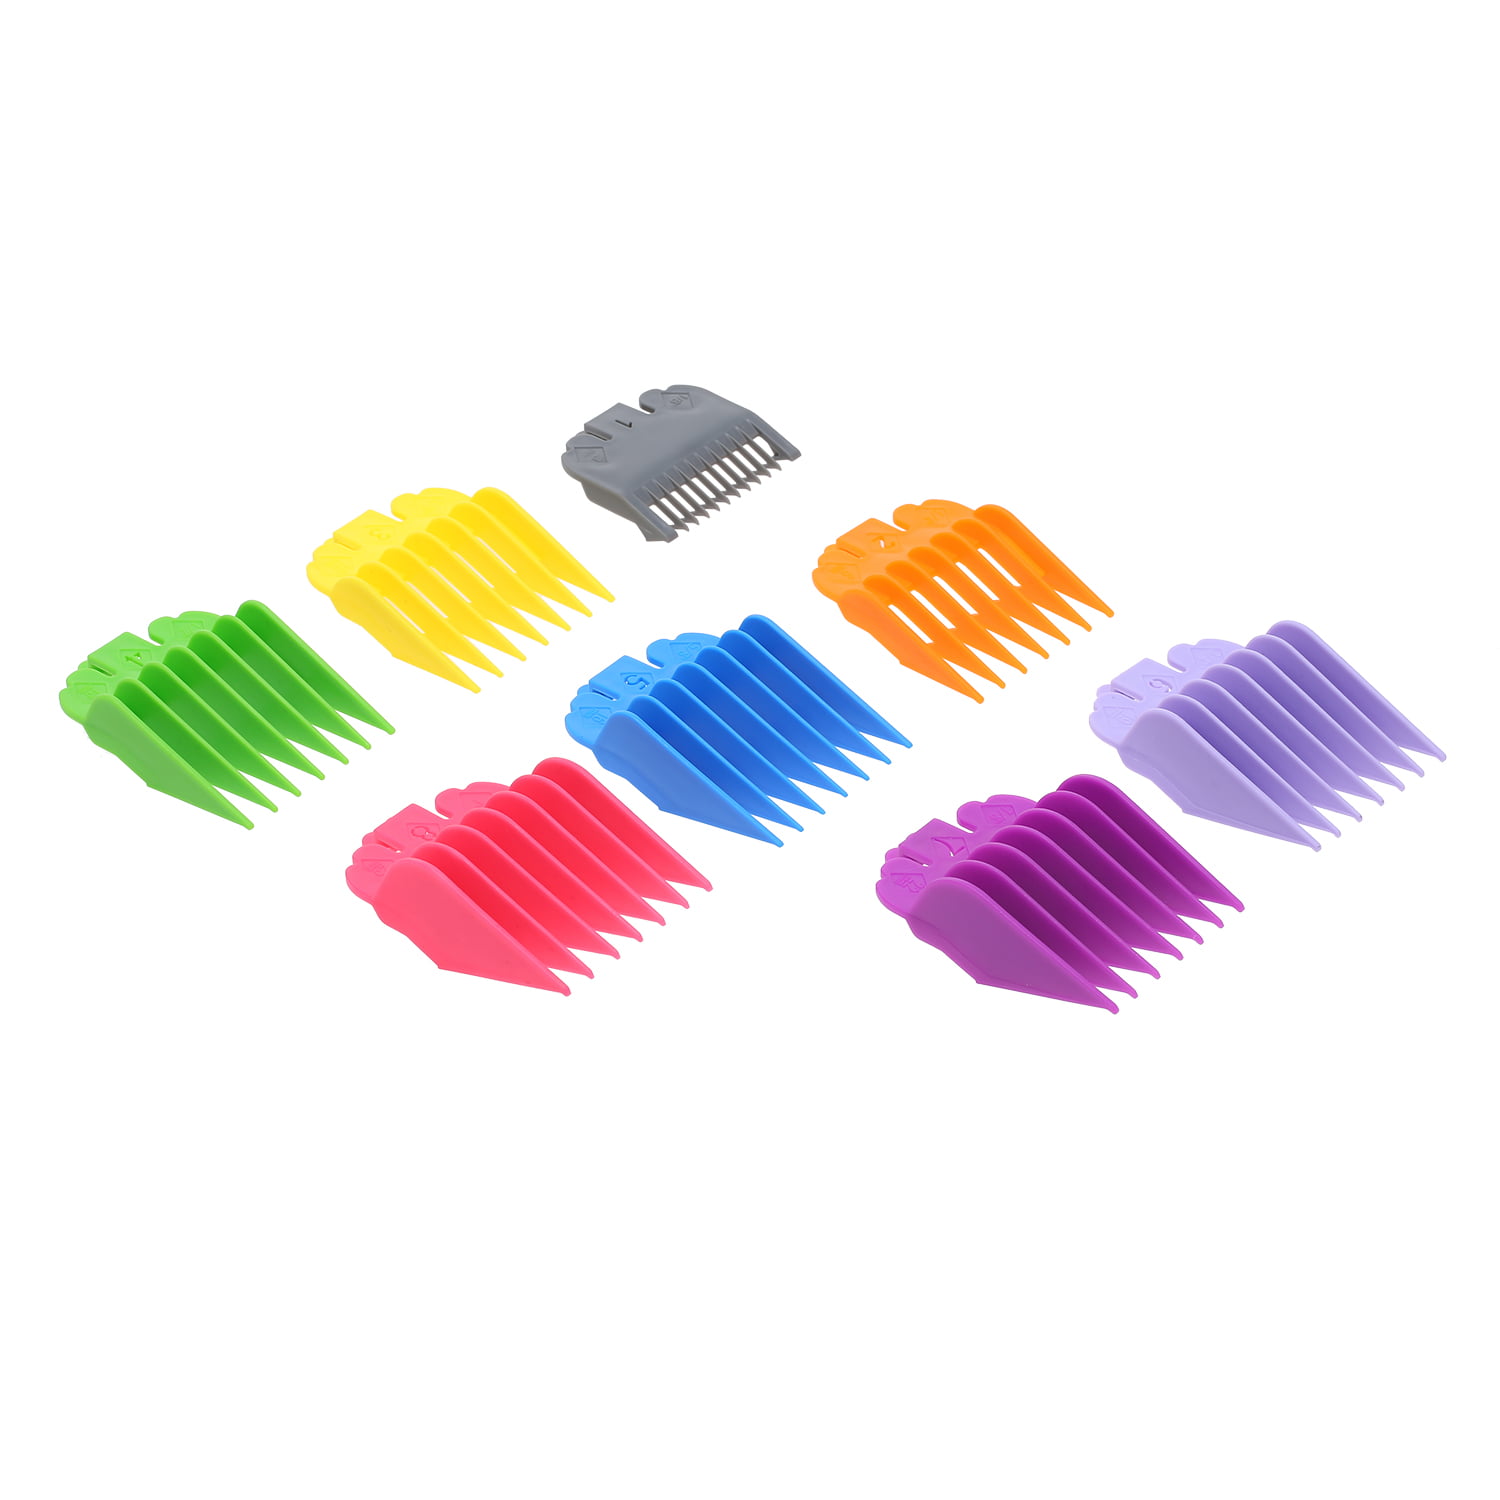 8PCS Hair Guide Comb Set for Wahl Hair Clippers Limit Combs Hair ...